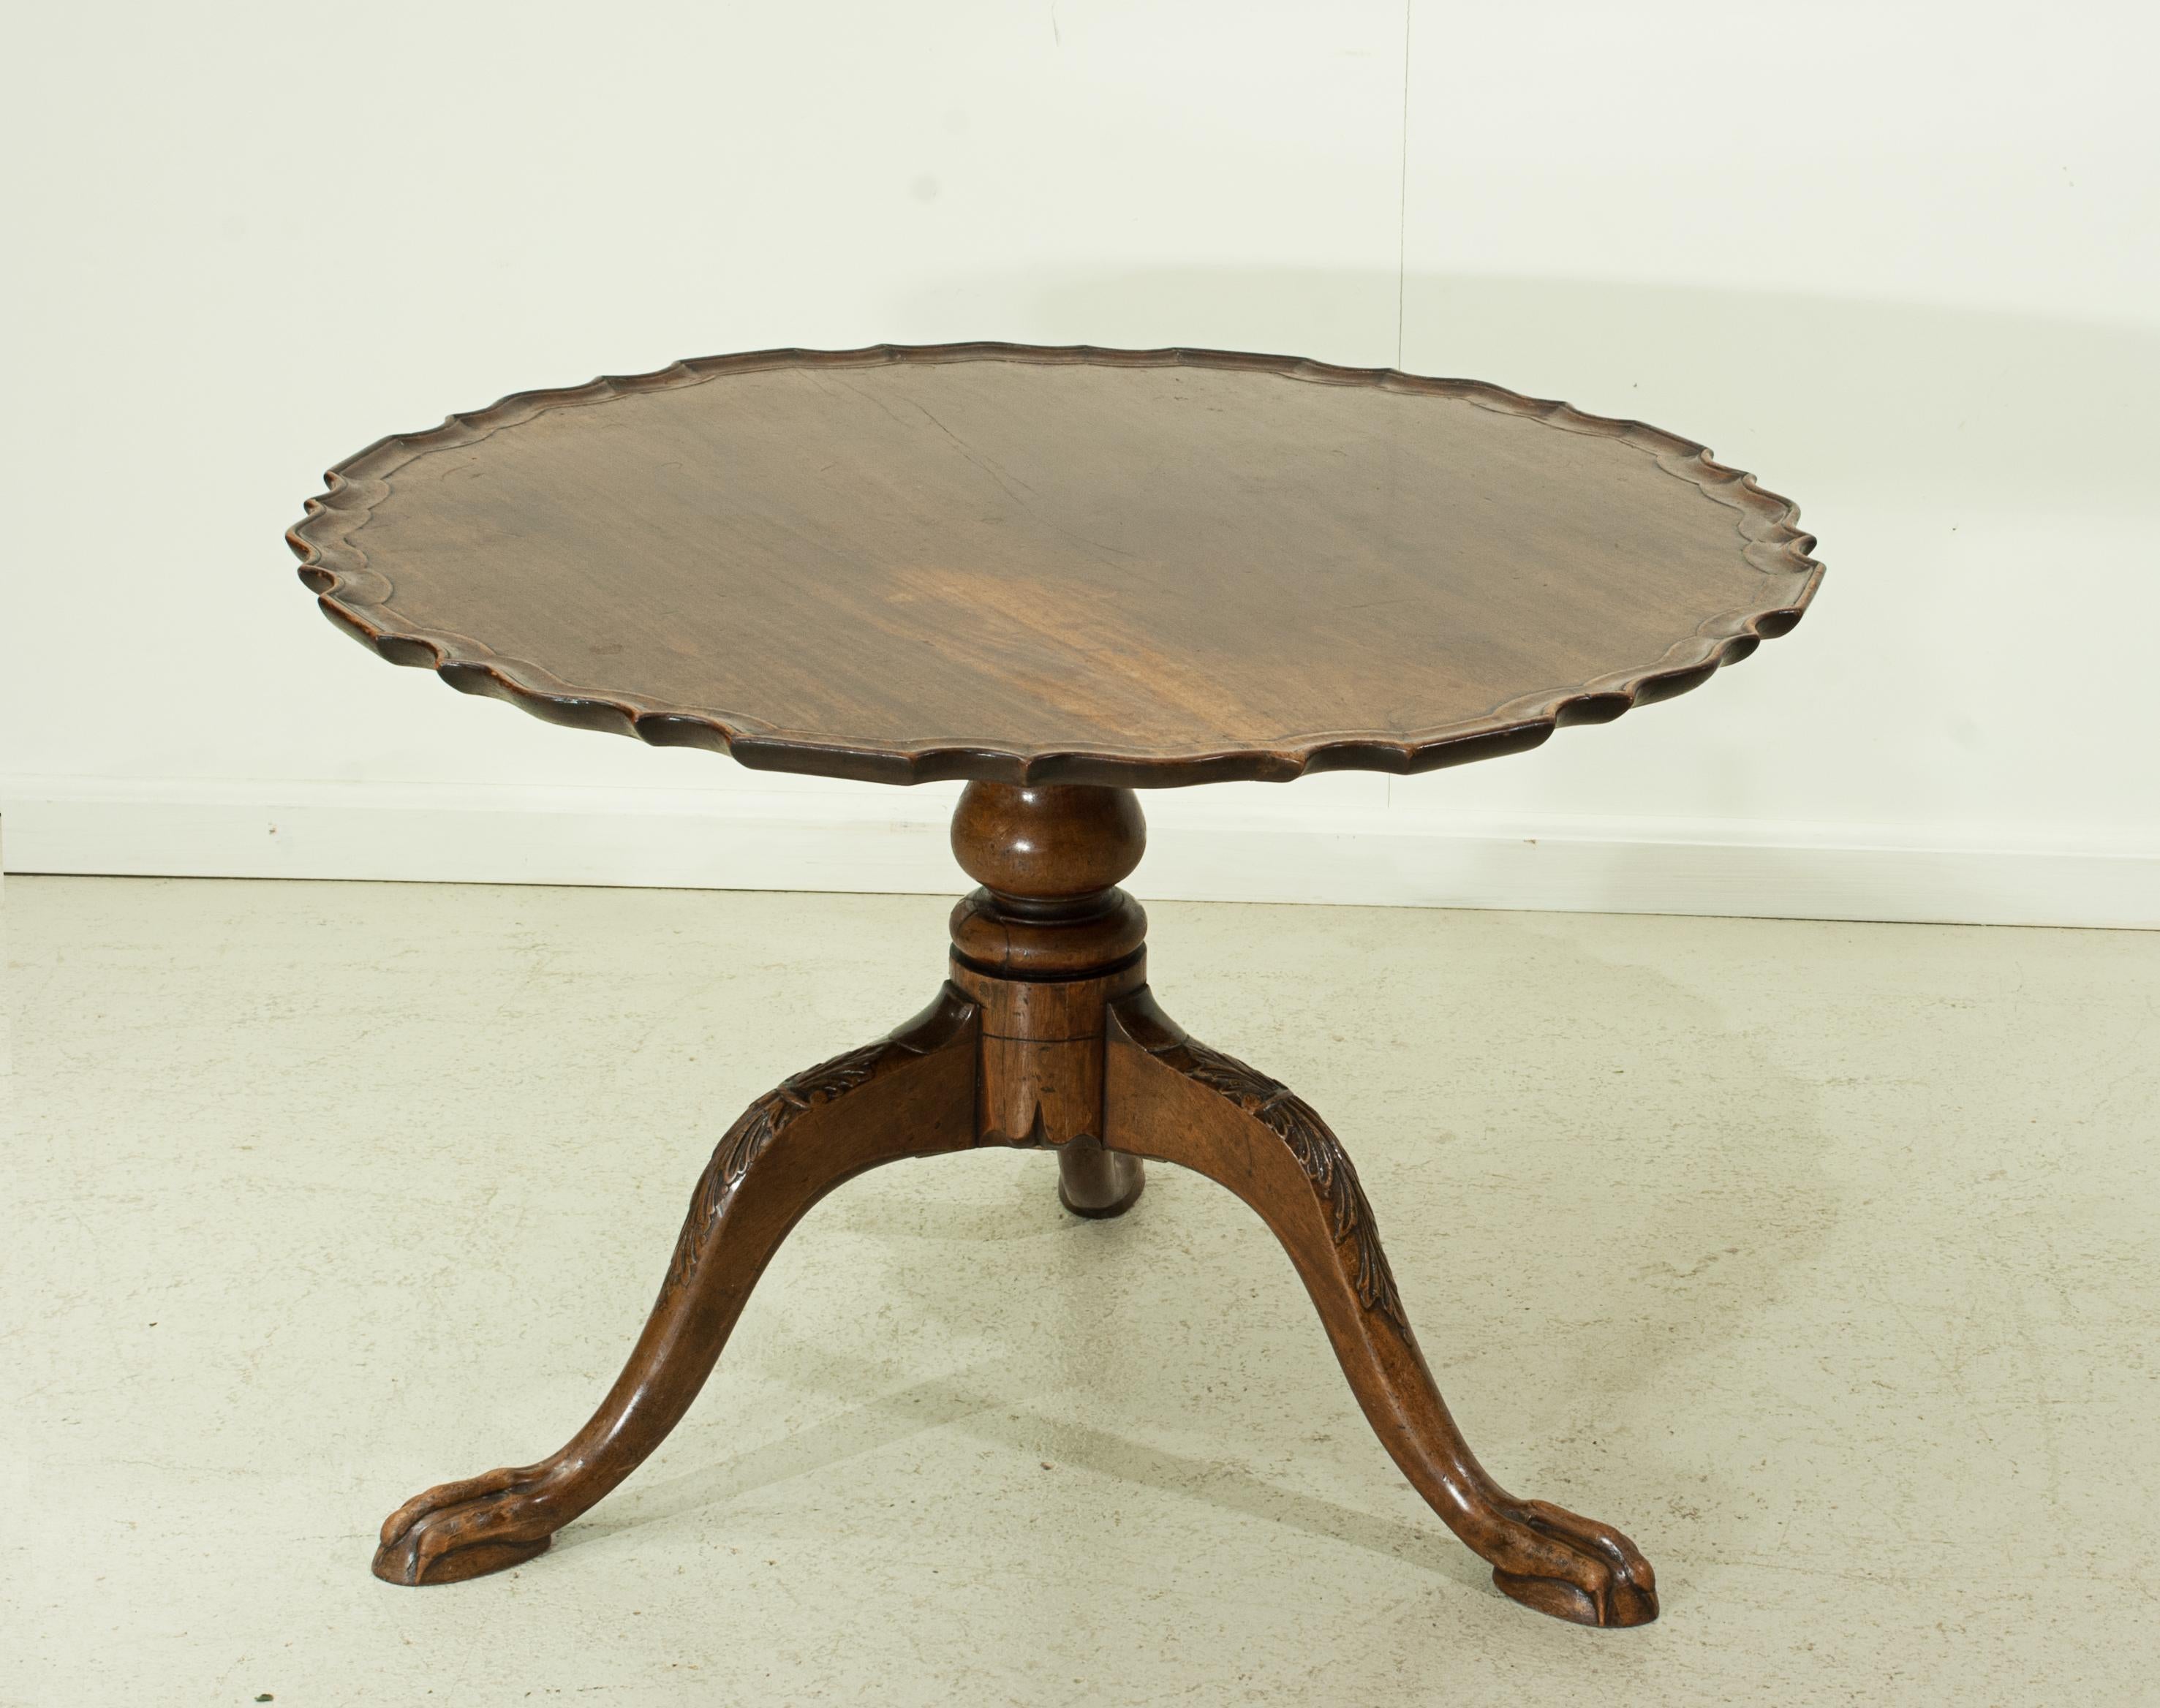 Tilt-top tripod mahogany table.
A good quality mahogany tilt top, occasional table with a pie crust top. Mounted on a turned column with a tripod base with carved legs terminating with a claw foot. The table has been reduced in height to be used as